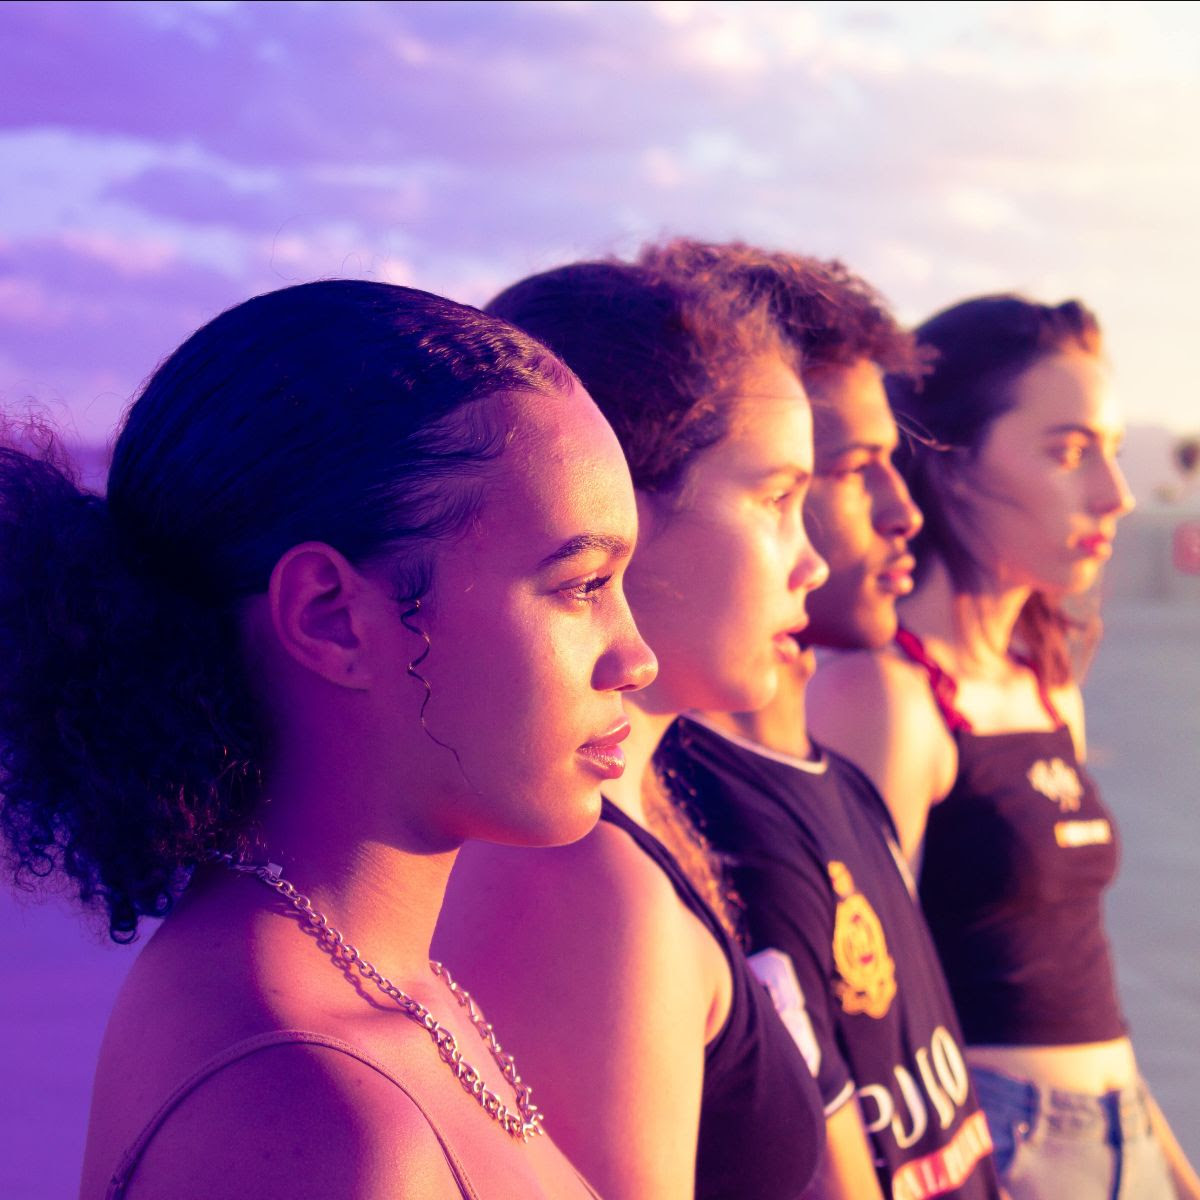 Side profile photo of four diverse young adults shoulder to shoulder outdoors with a cloudy background.